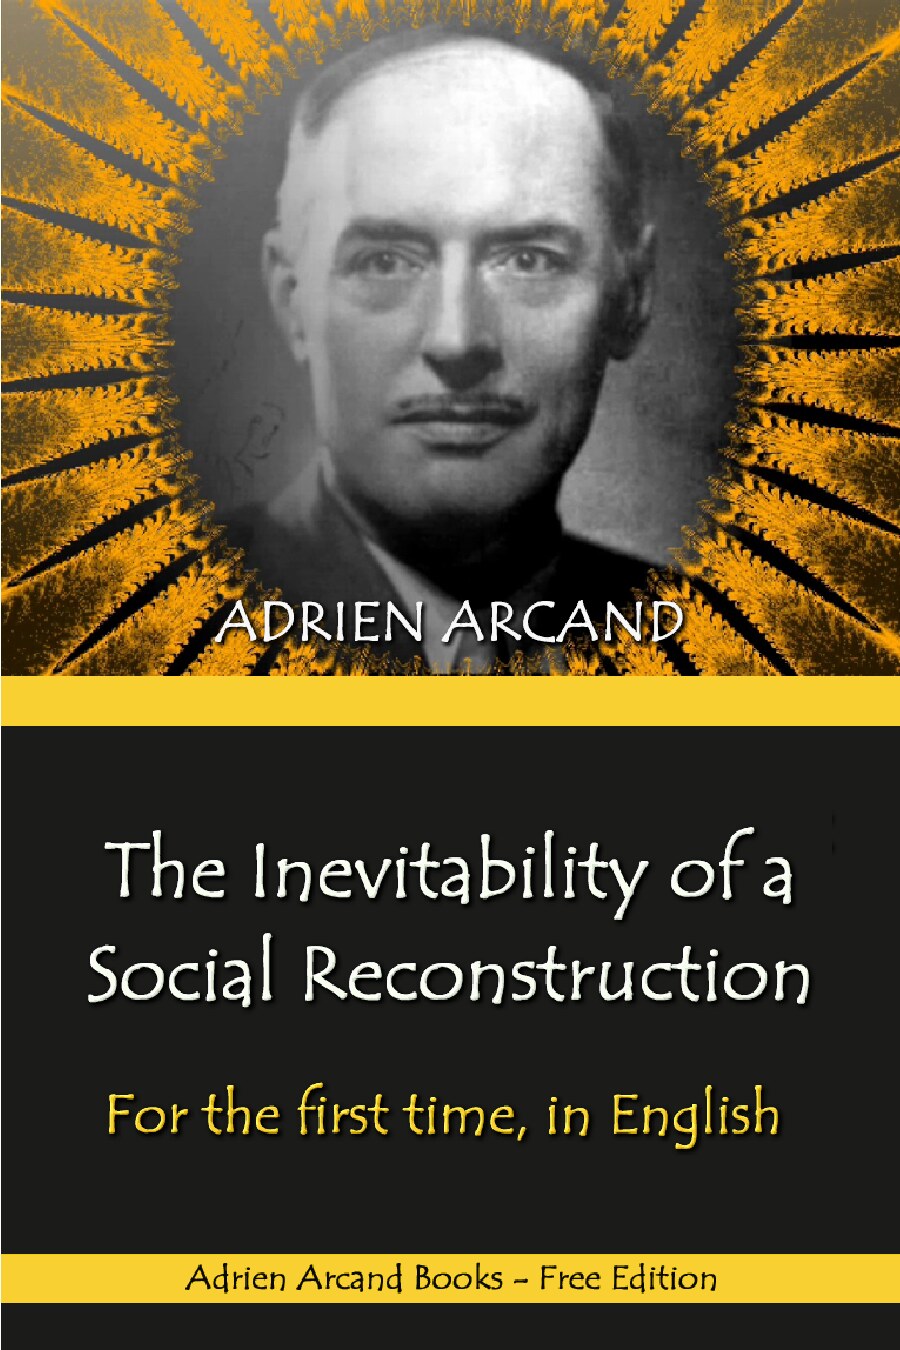 The Inevitability of a Social Reconstruction